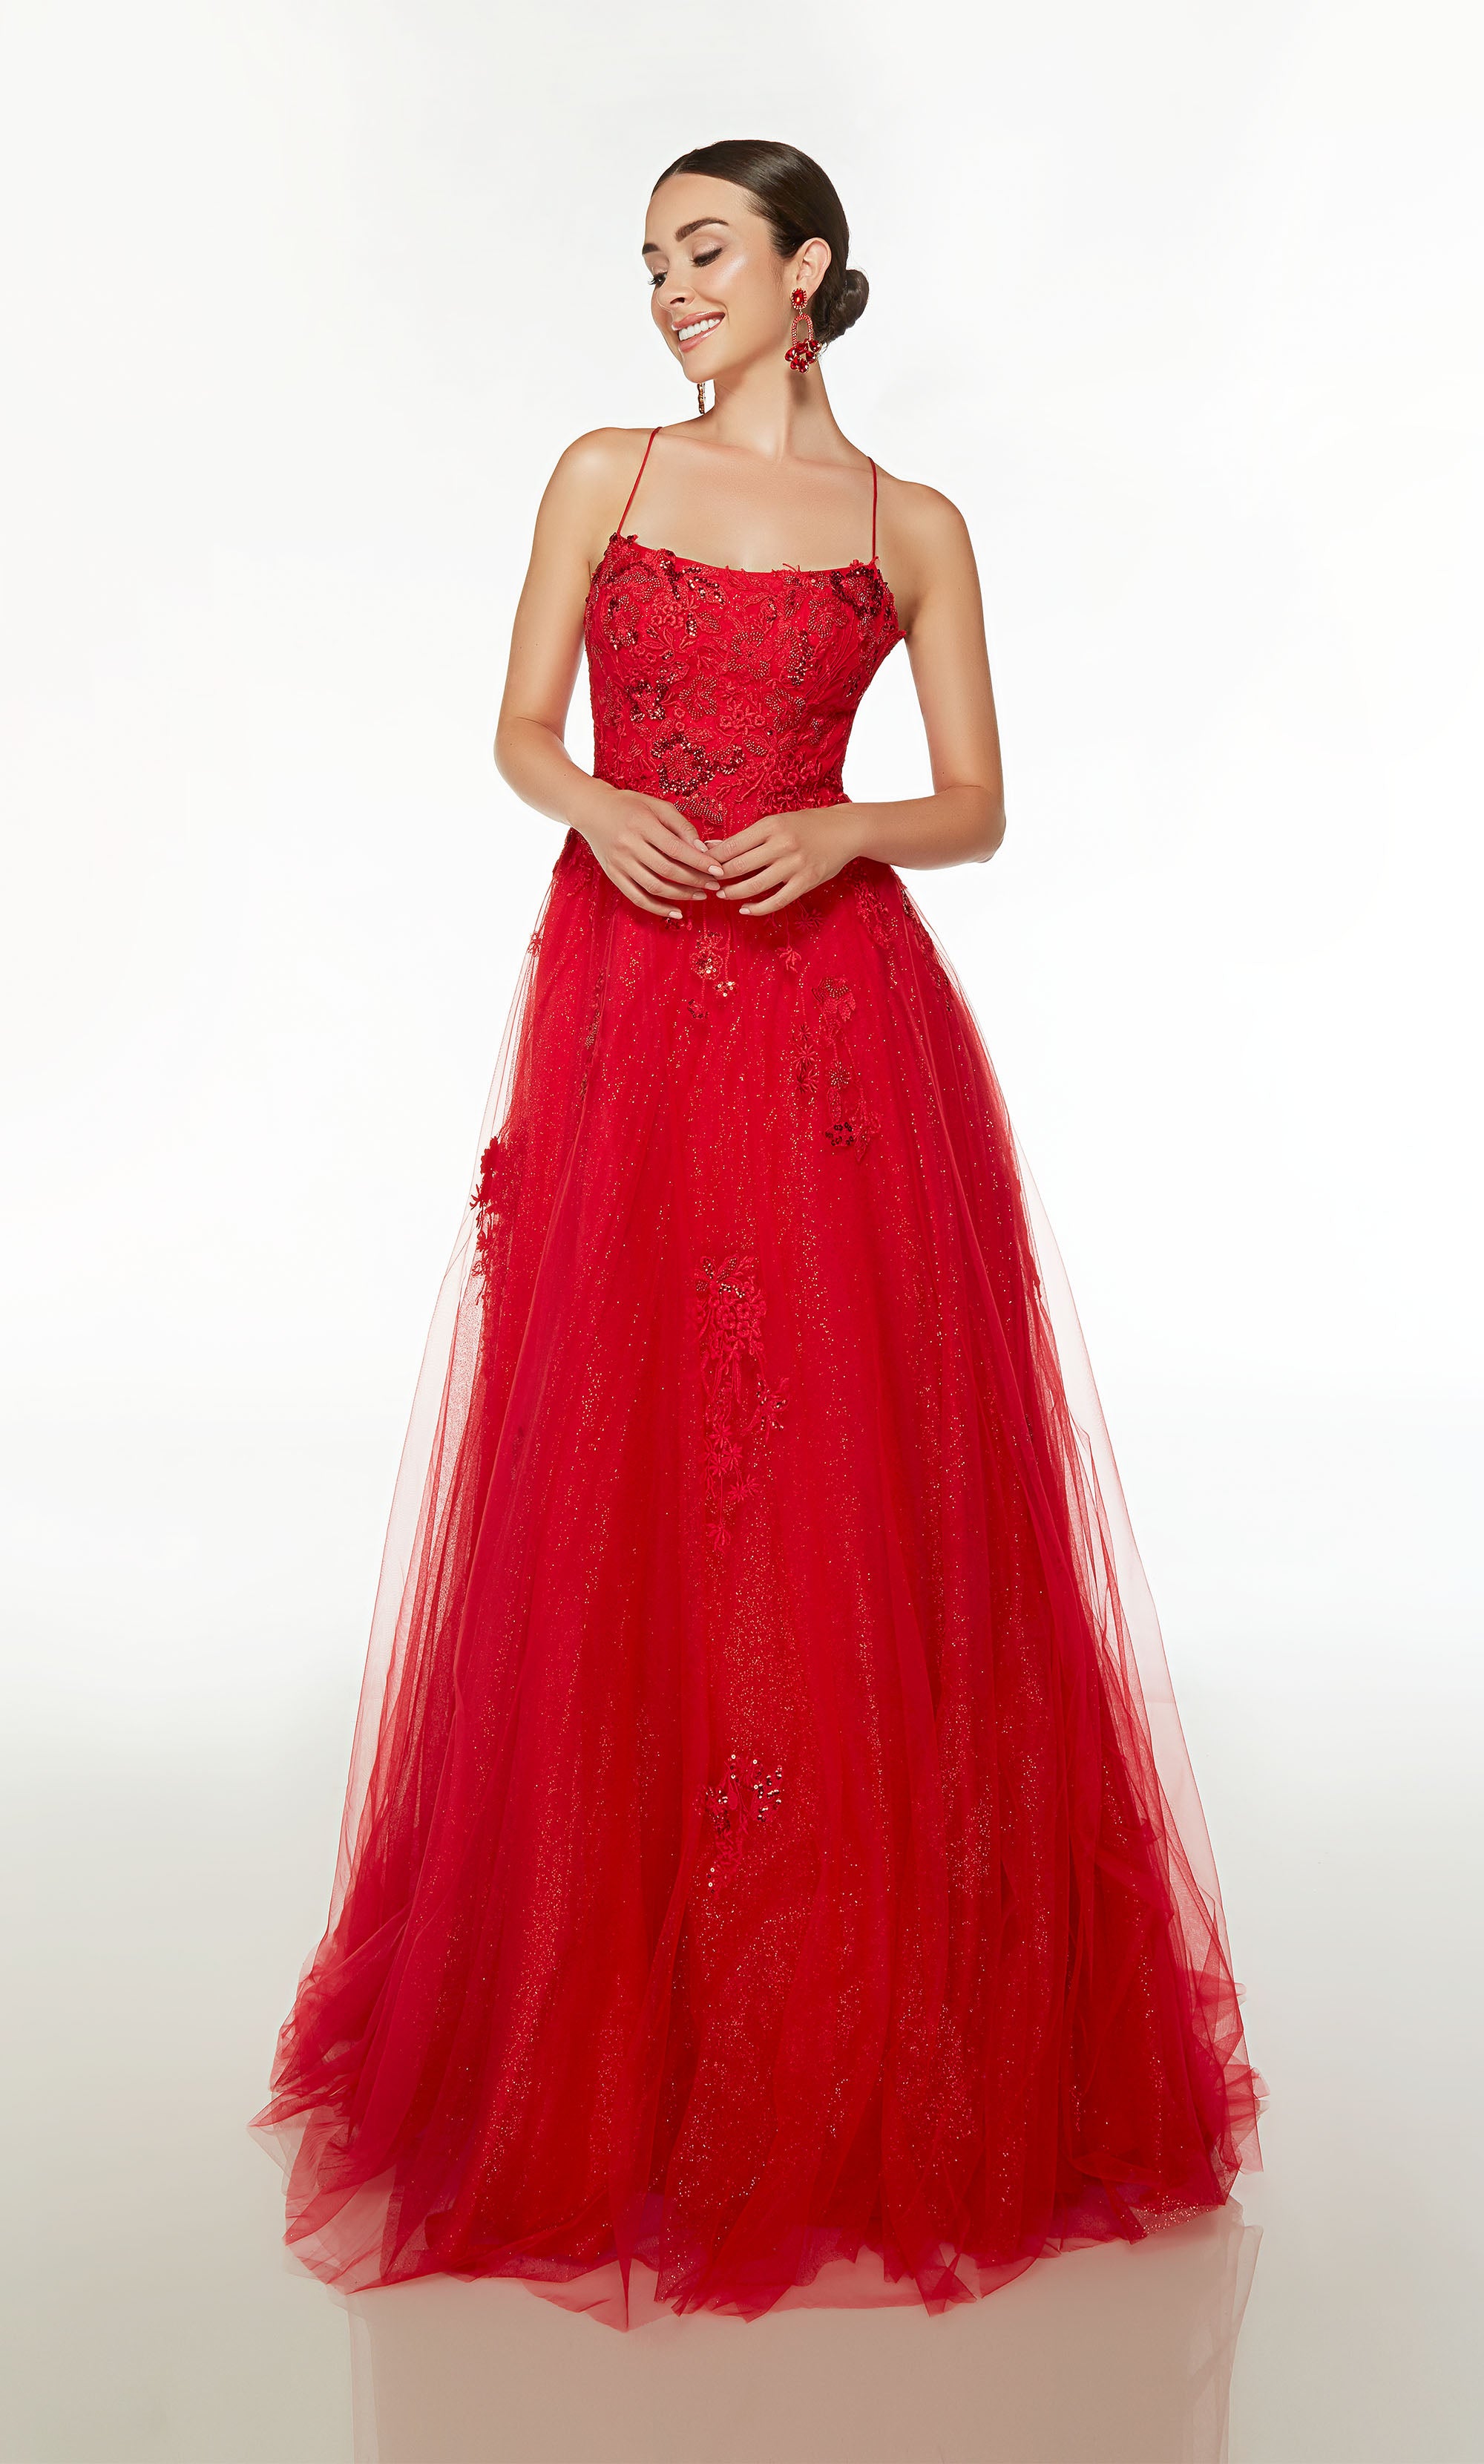 Red prom dress: Scooped neckline, A-line skirt, crisscross lace up back, and train crafted in glitter tulle and adorned with delicate beaded lace.